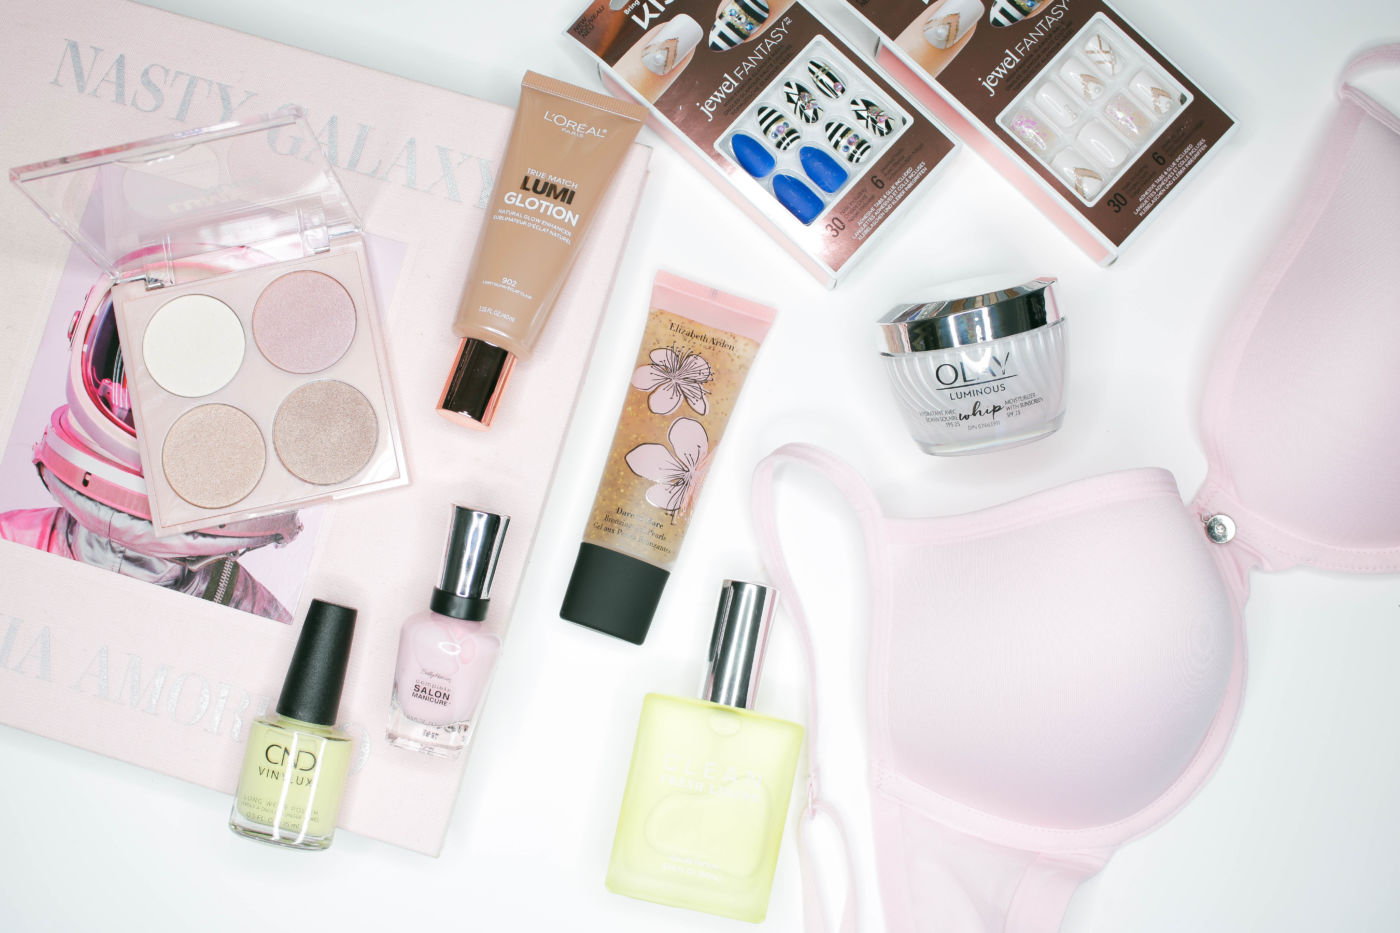 spring 2018, spring 2018 beauty, spring 2018 makeup, spring 2018 fashion, 6 things i'm excited for in spring 2018, kiss nails jewel fantasy, kiss jewel fantastic nails, olay whips, olay whips review, la vie en rose spacer foam bra, lightweight bra, t-shirt bra, clean fresh linen, fresh linen eau de parfum, l'oreal lumi glotion, l'oreal lumi glow nude, elizabeth arden dare to bare bronzing gel pearls, gel bronzer, cnd chic shook collection, cnd jellied, sally hansen blush nail polish, sally hansen blush against the world, spring nails, spring nail polish, best spring nail polish shades